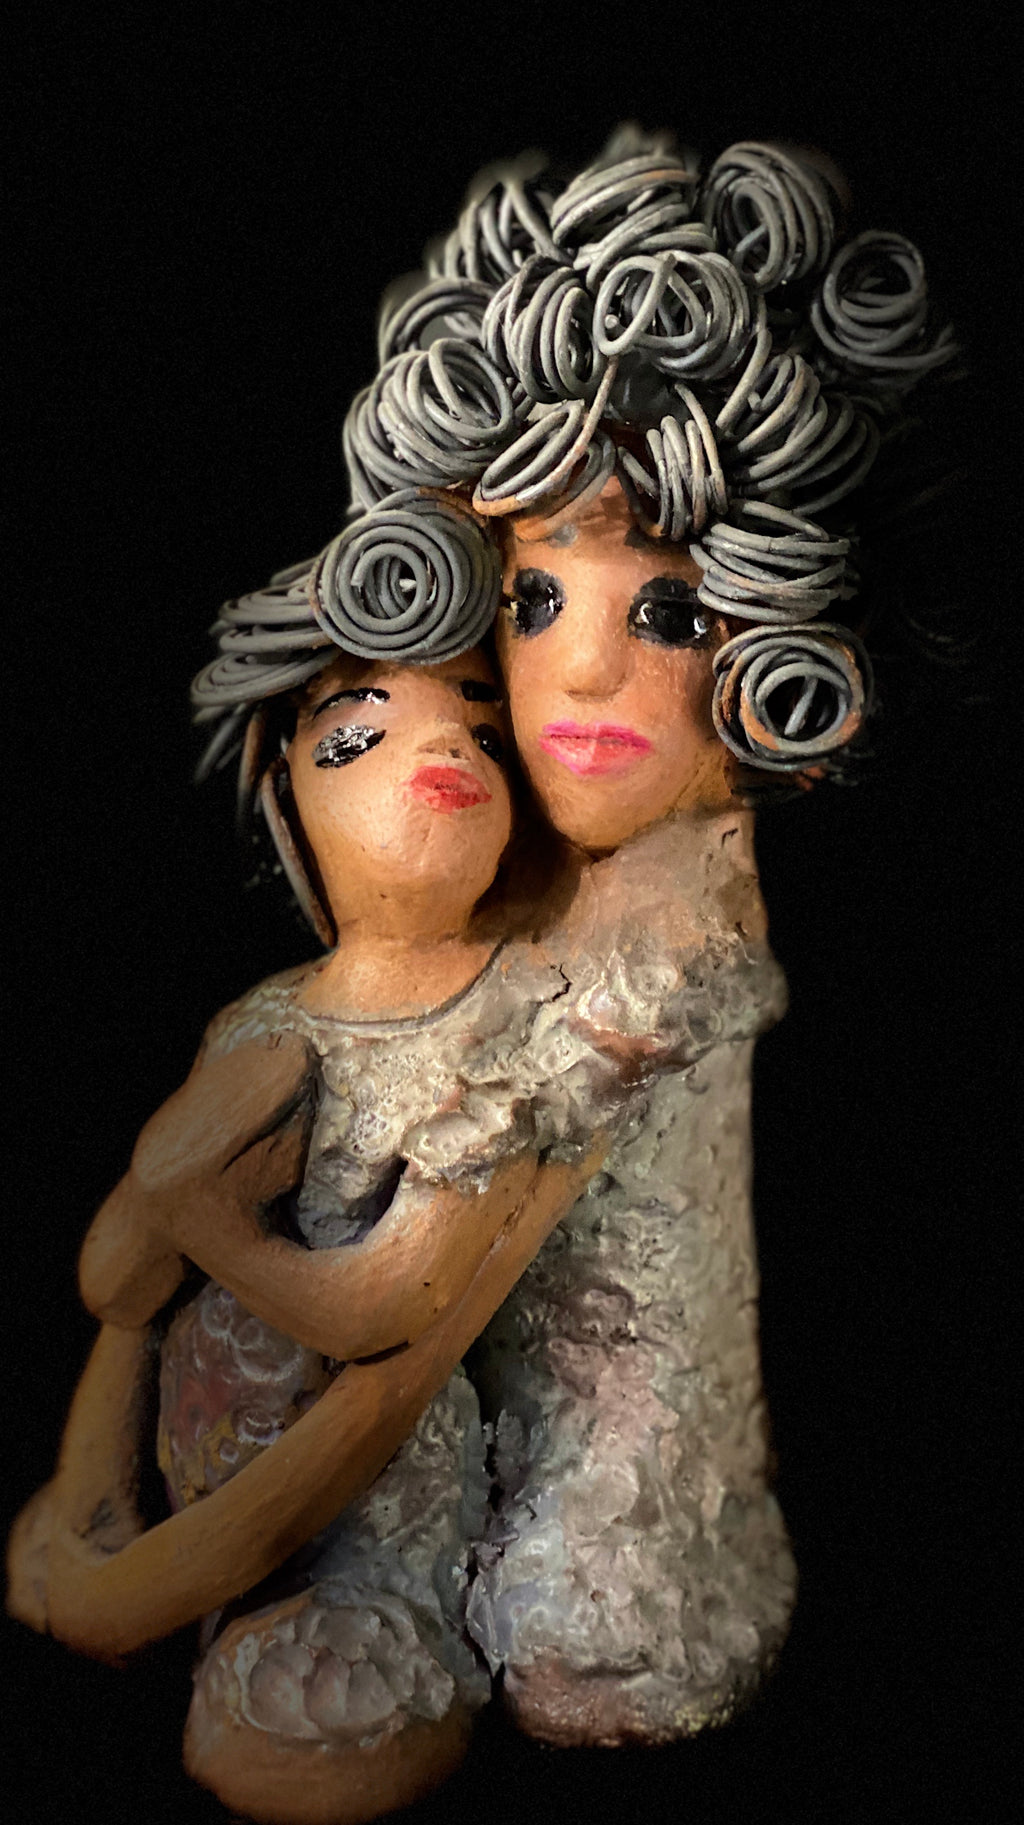 I love You! I Love You stands 8.5 " x 4.5" x 4".5" and weighs 2.10 lbs. They have lovely honey brown complexions. Combined, I Love You  has over 25 feet of curly wire hair. Their dresses are glossy metallic copper. With their long loving arms, one embraces the other I Love You! will  help illustrate the love that is in your home!